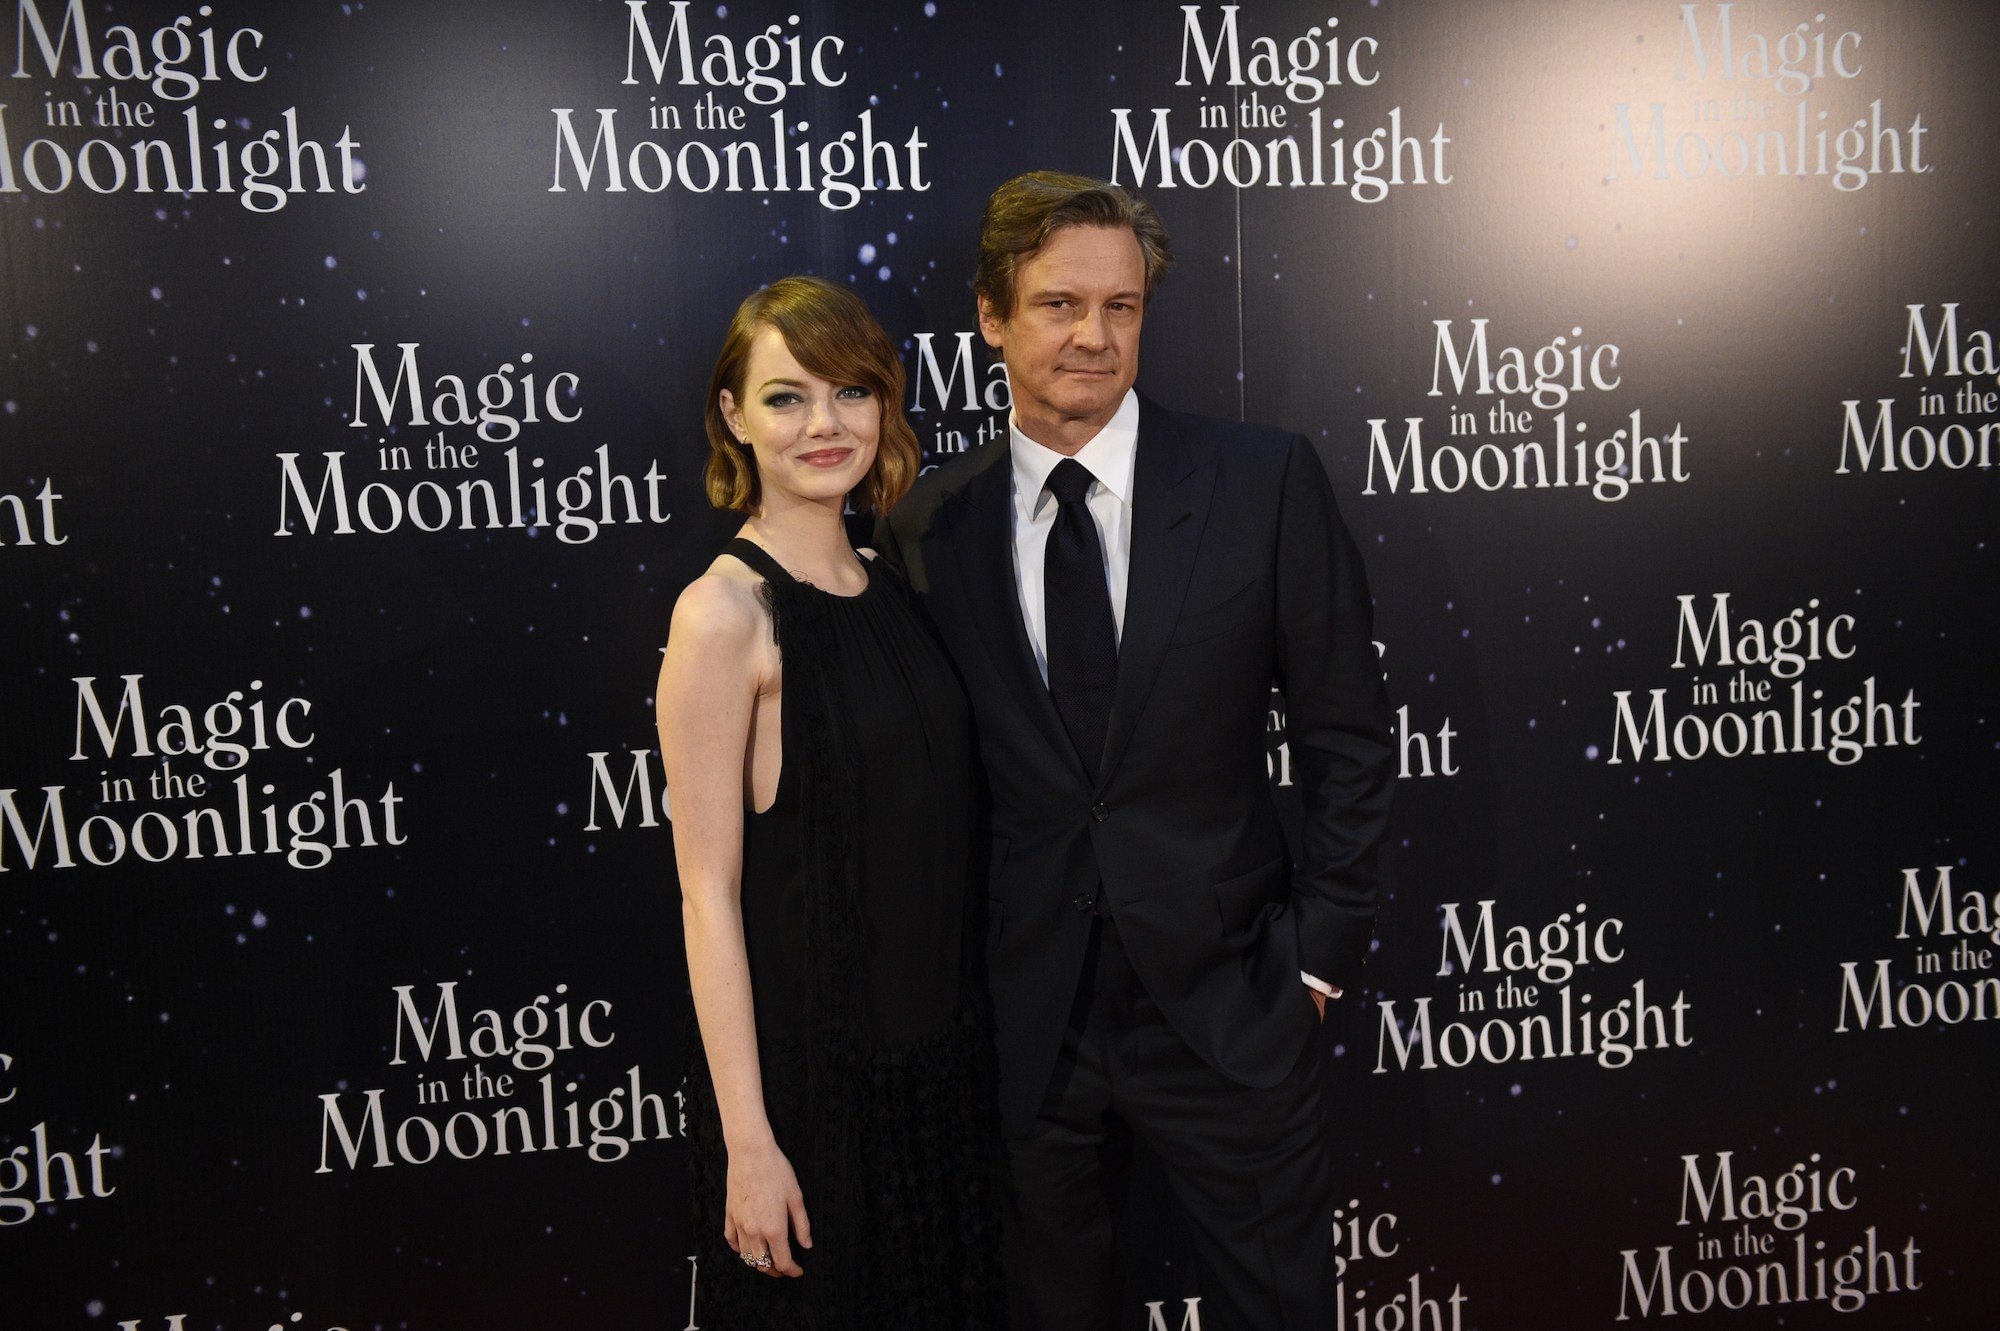 (L-R) Emma Stone and Colin Firth smiling in front of a black background with repeating logos